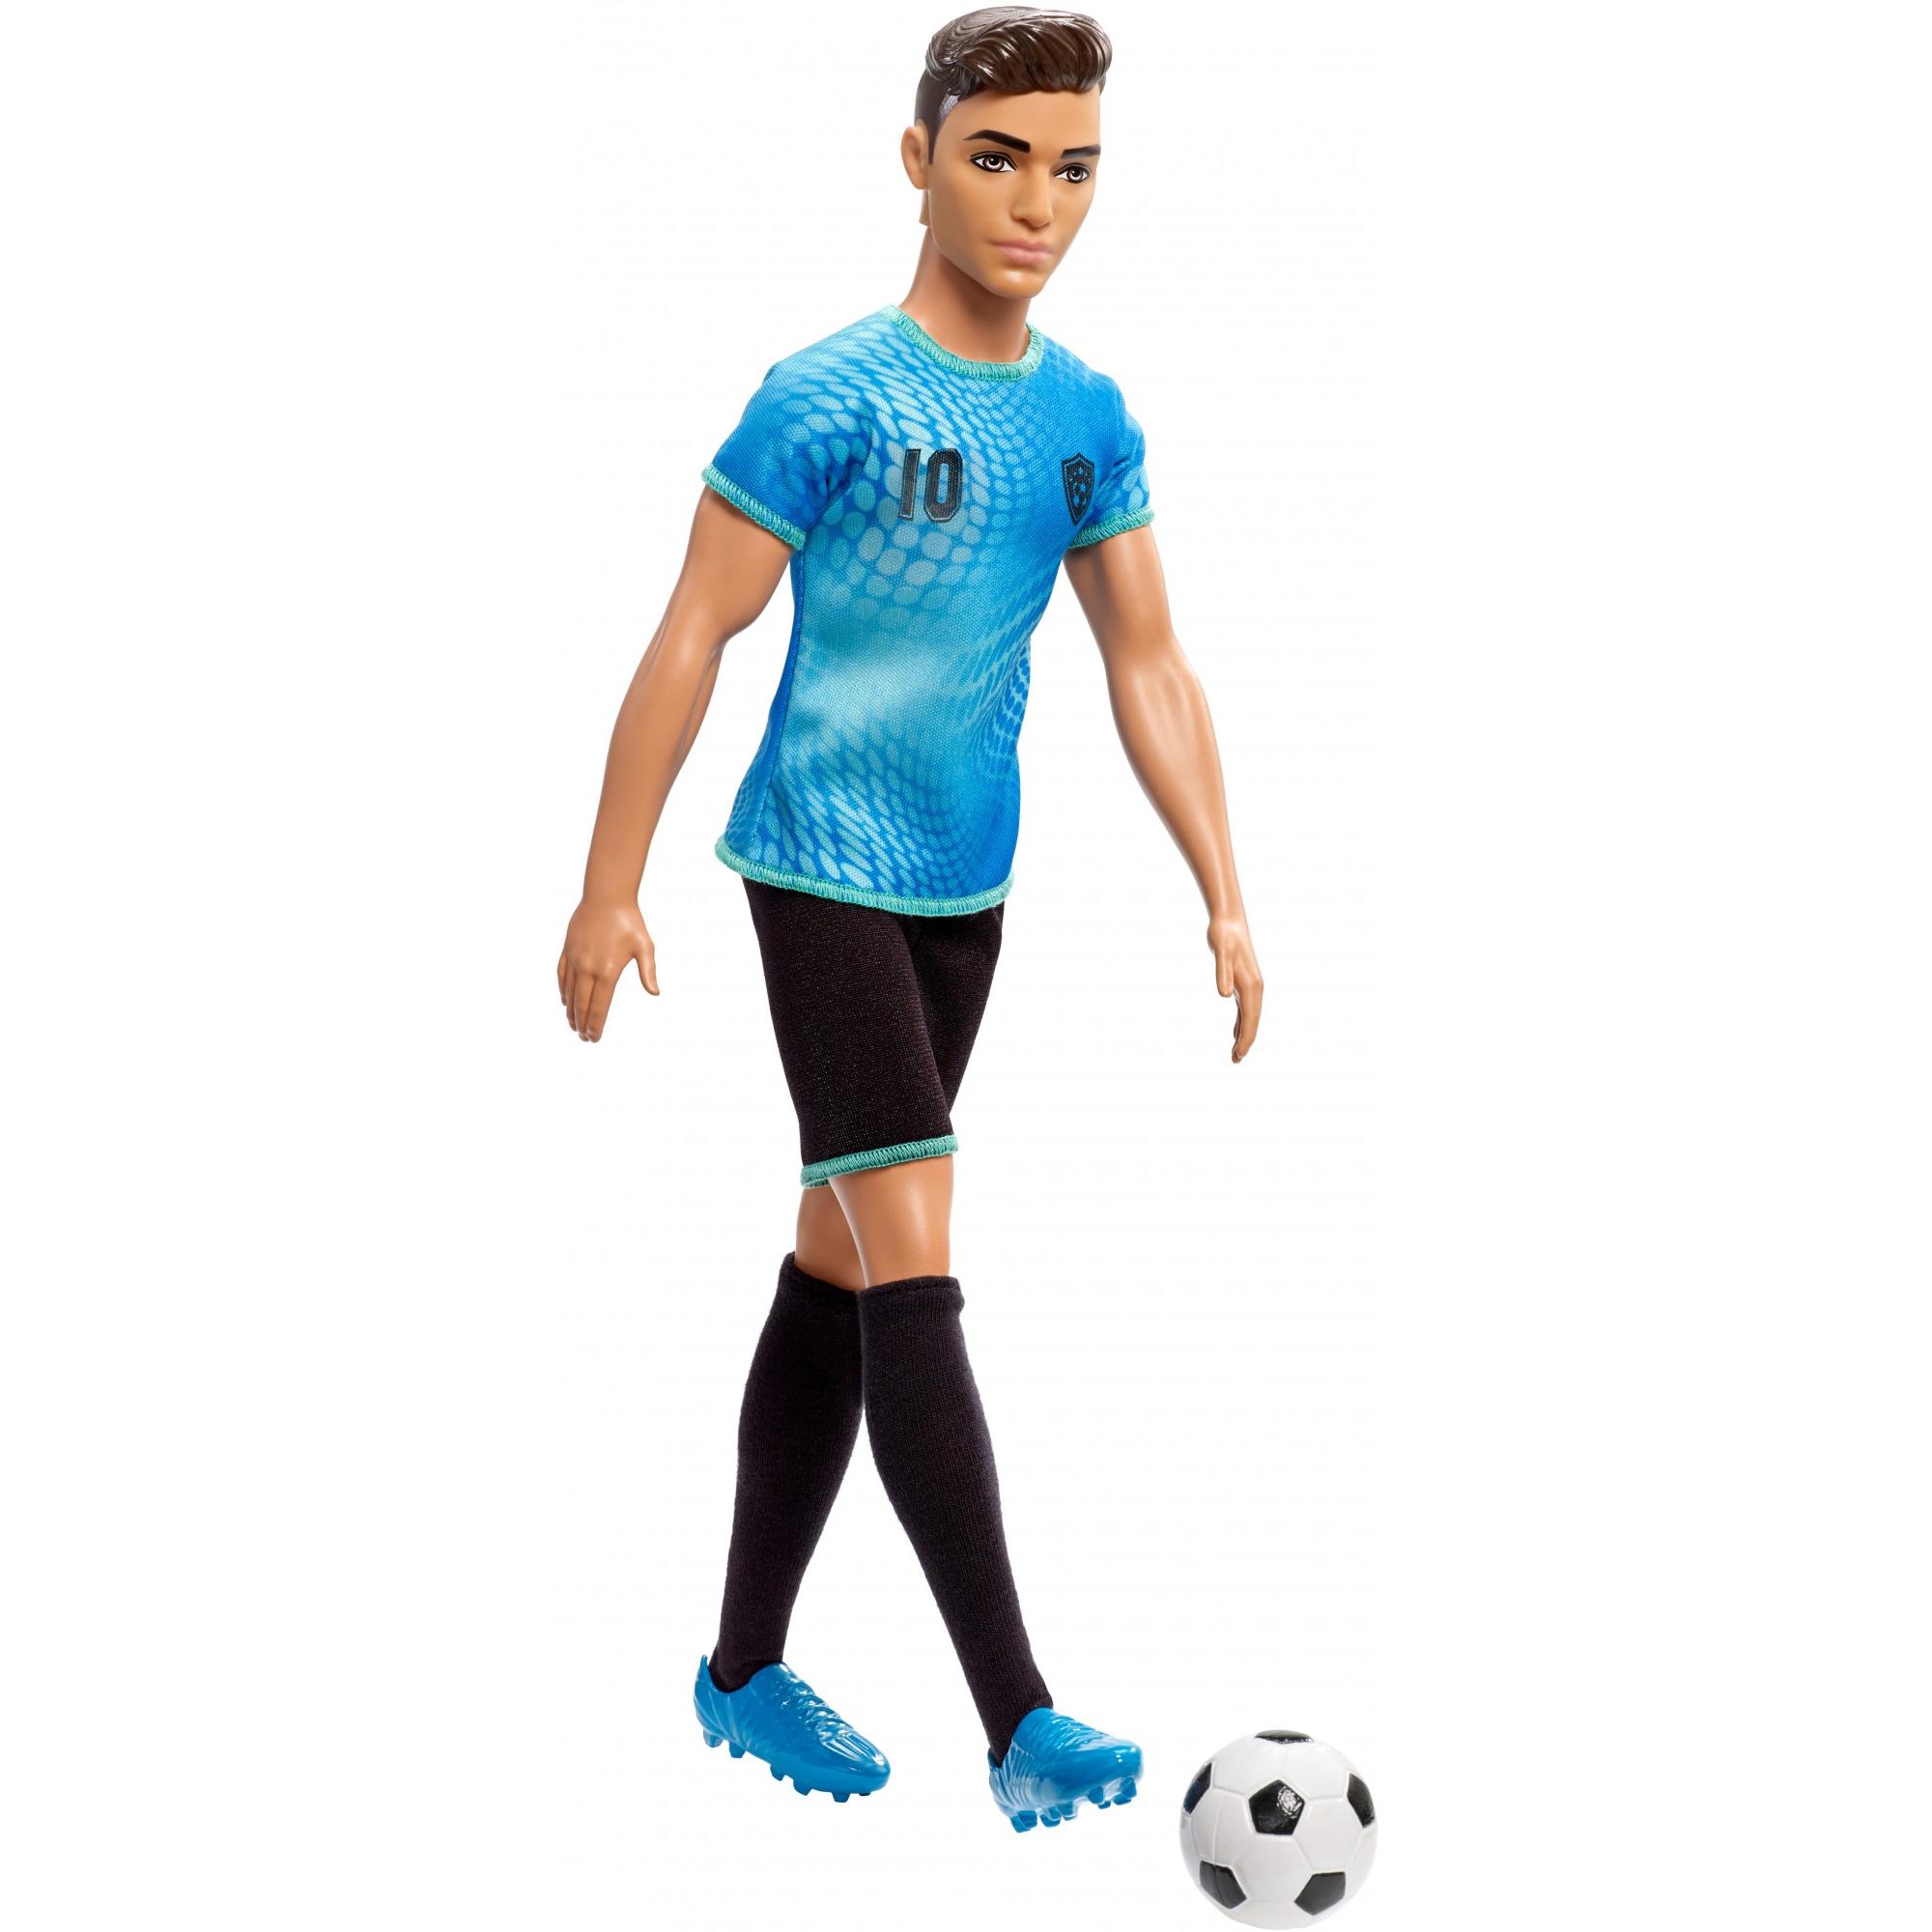 Barbie Ken Careers Soccer Player Doll with Soccer Ball - image 1 of 6